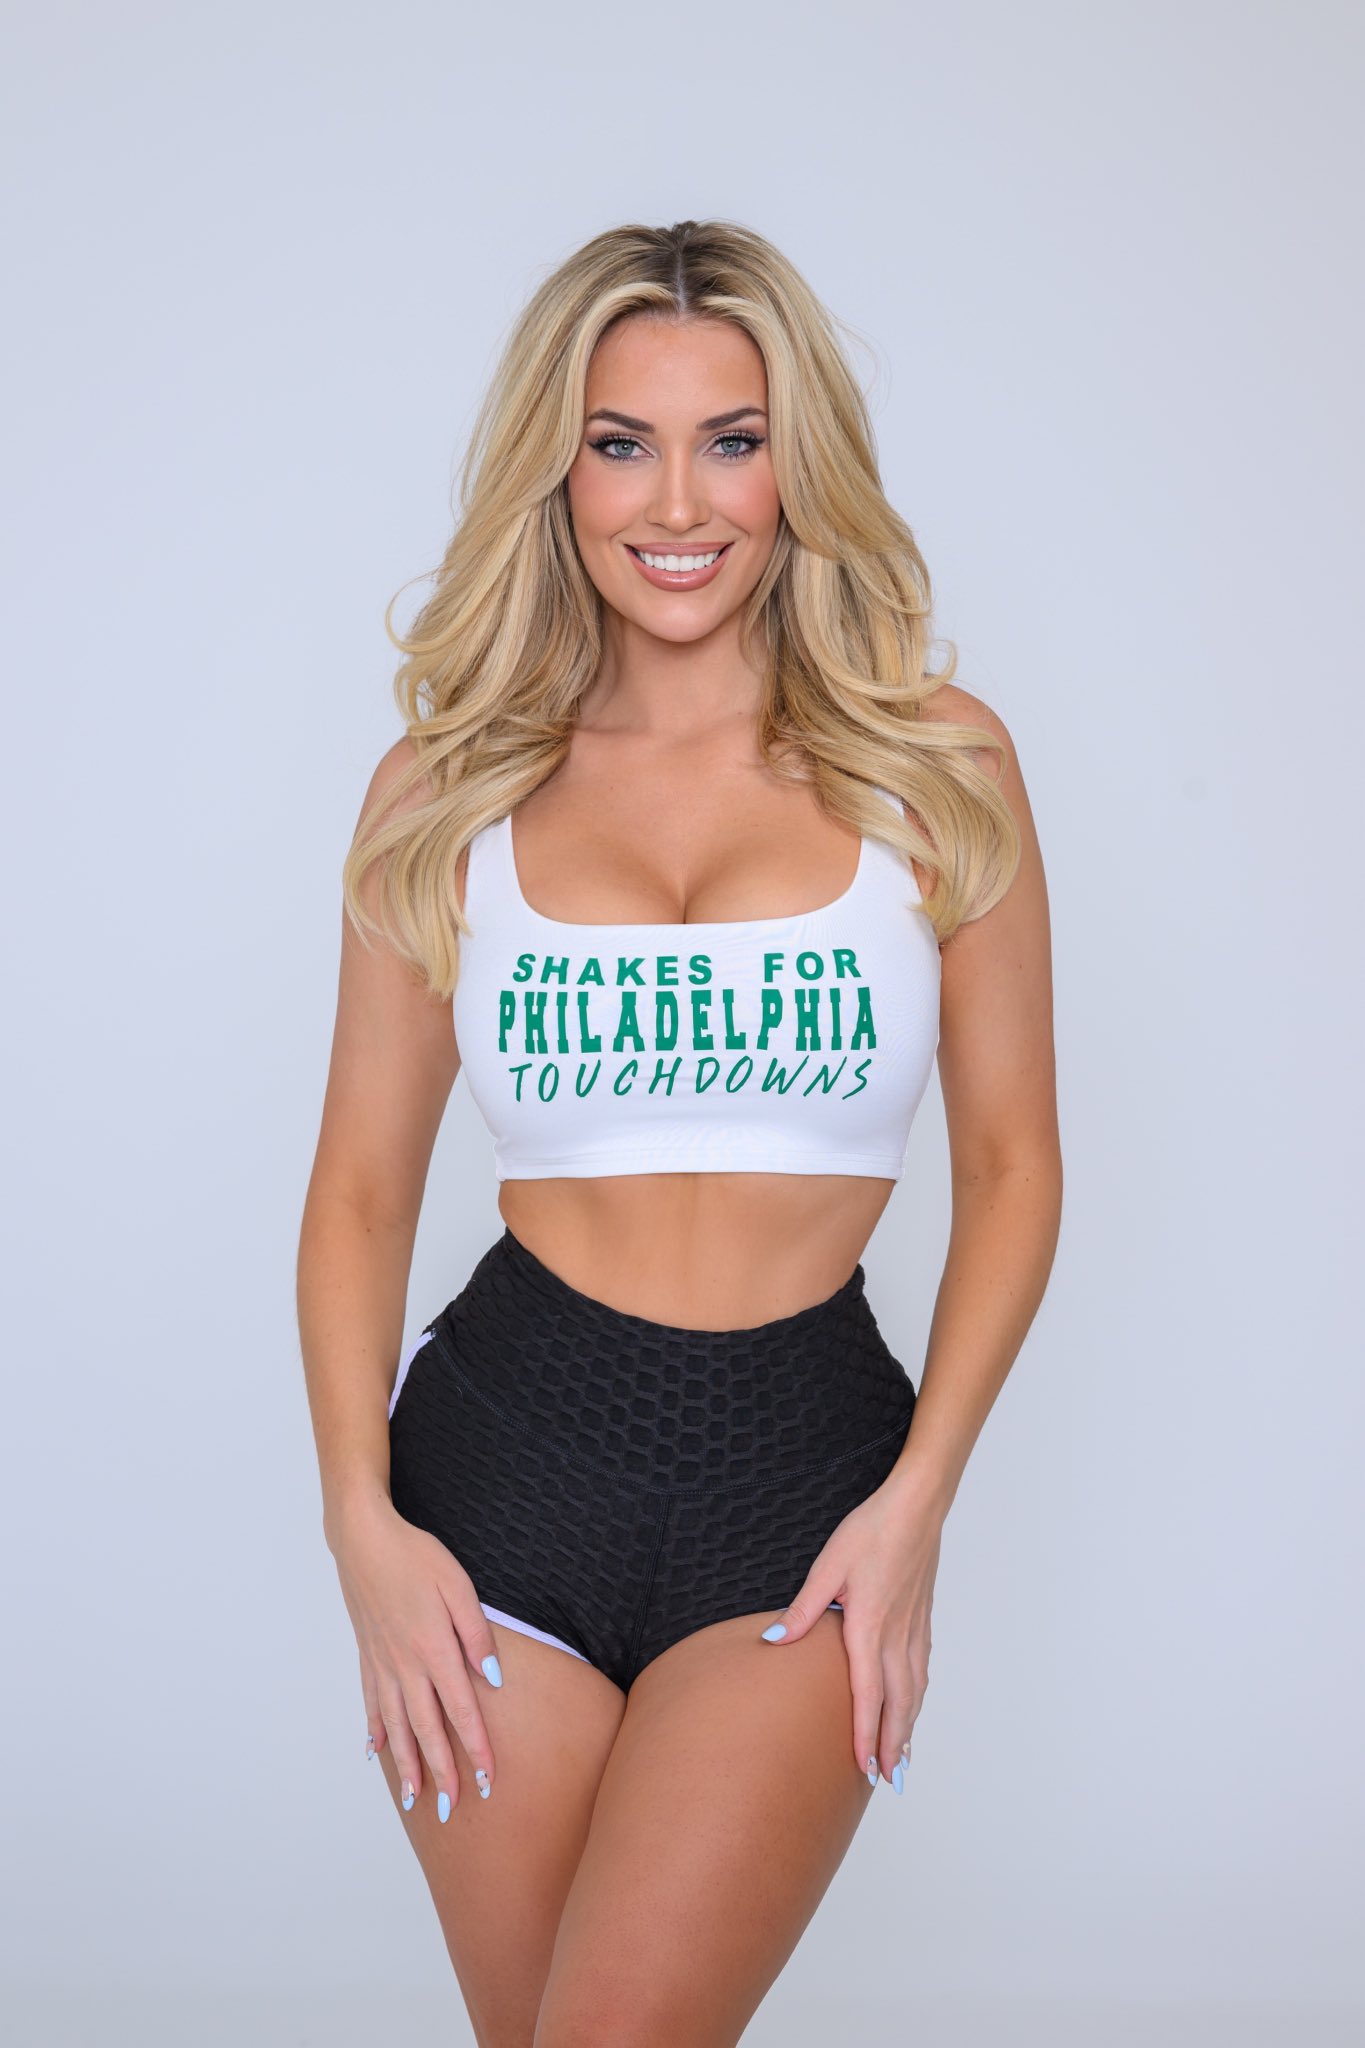 Paige Spiranac Wants to Know if You Pull Out! - Photo 21